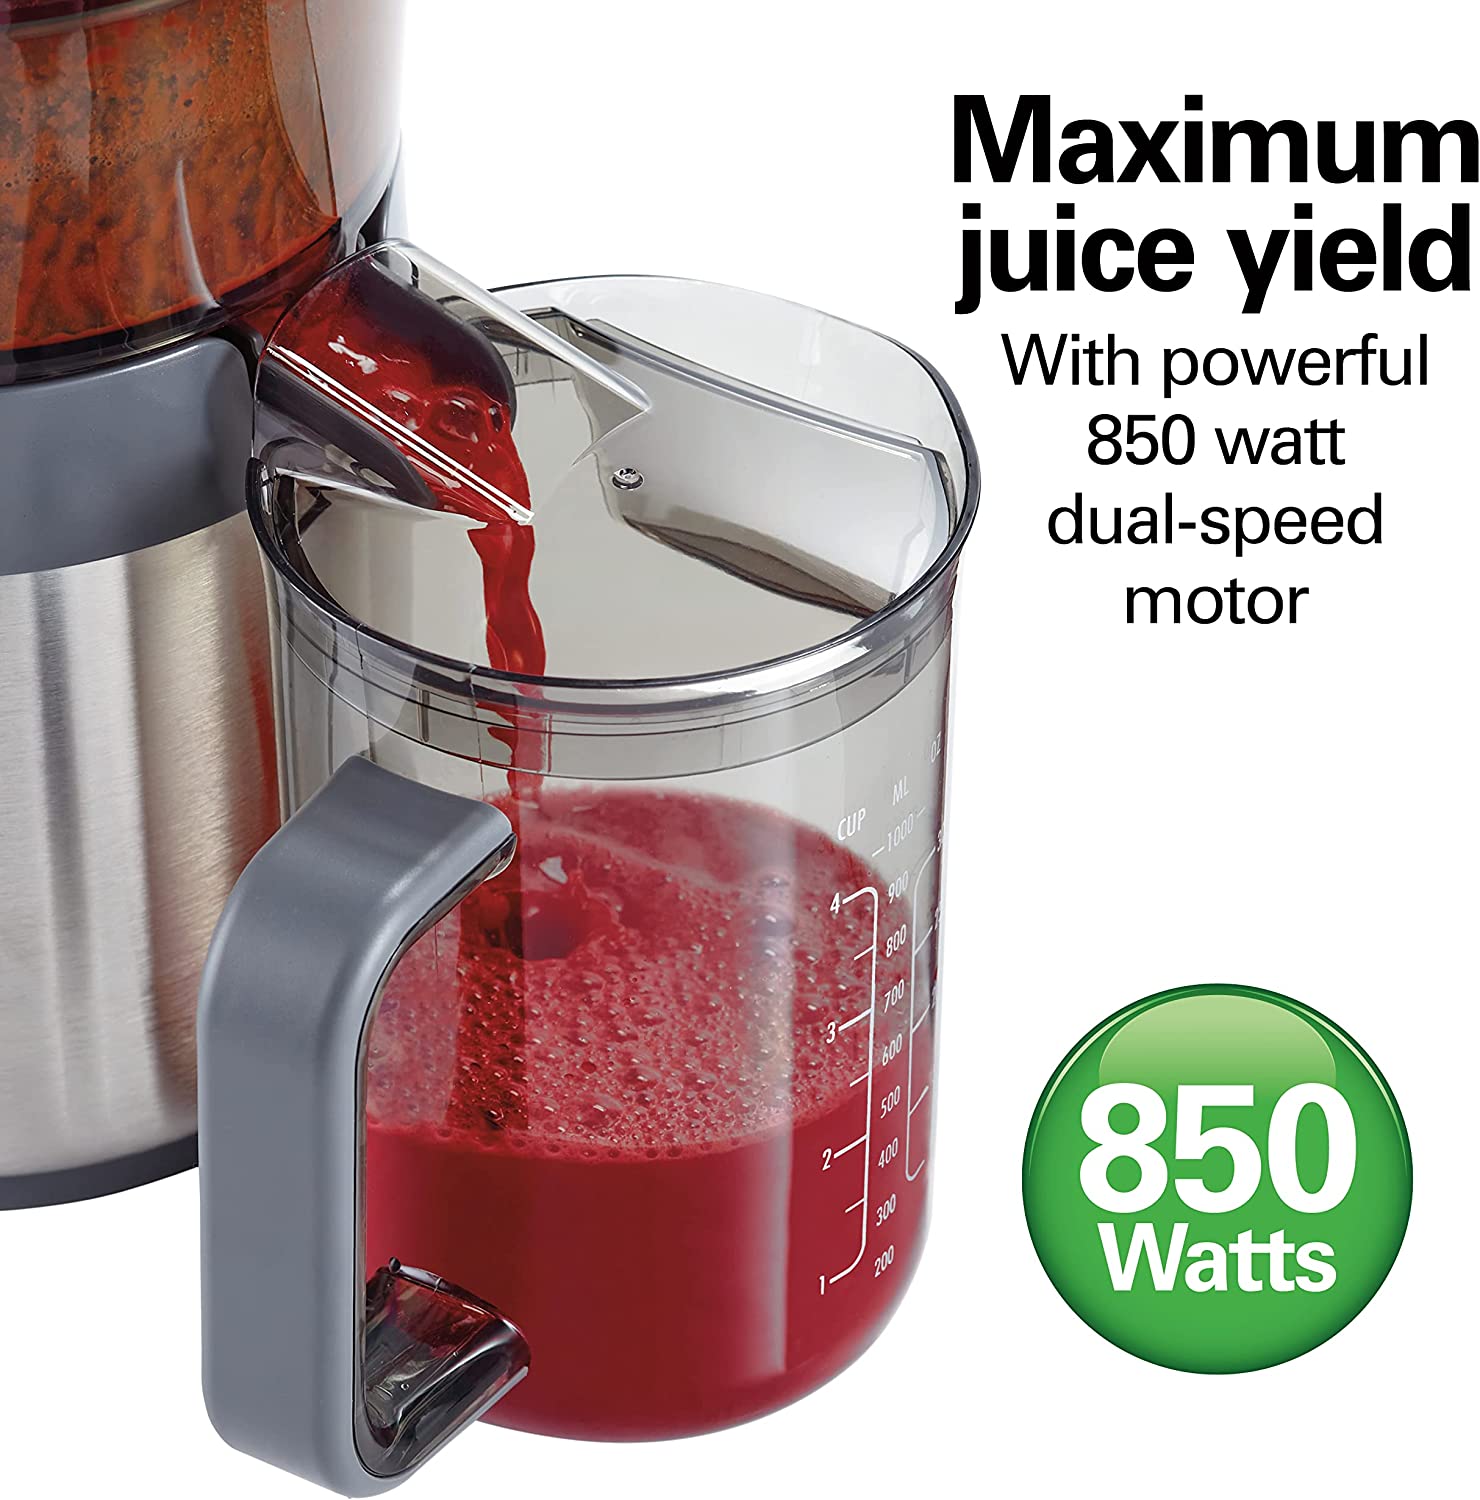 https://bigbigmart.com/wp-content/uploads/2023/03/Hamilton-Beach-Juicer-Machine-Centrifugal-Extractor-Big-Mouth-3-Feed-Chute-Easy-Clean-2-Speeds-BPA-Free-Pitcher-Holds-40-oz.-850W-Motor-Silver4.jpg